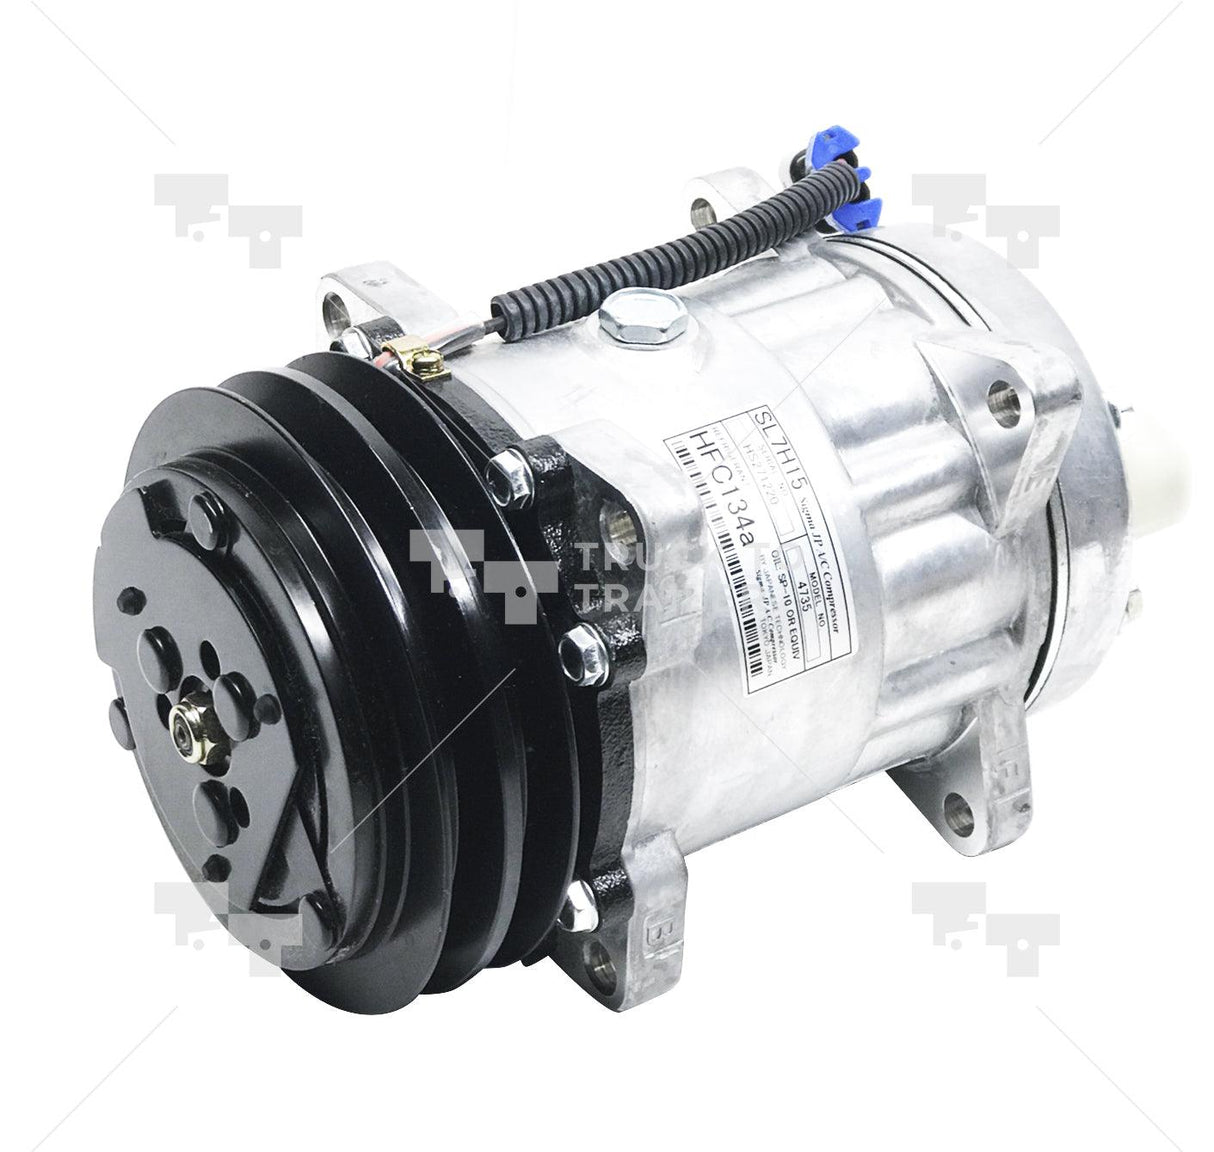 03-3422 22-41180-000 Mei® Truck A/C Ac Compressor For Freightliner.